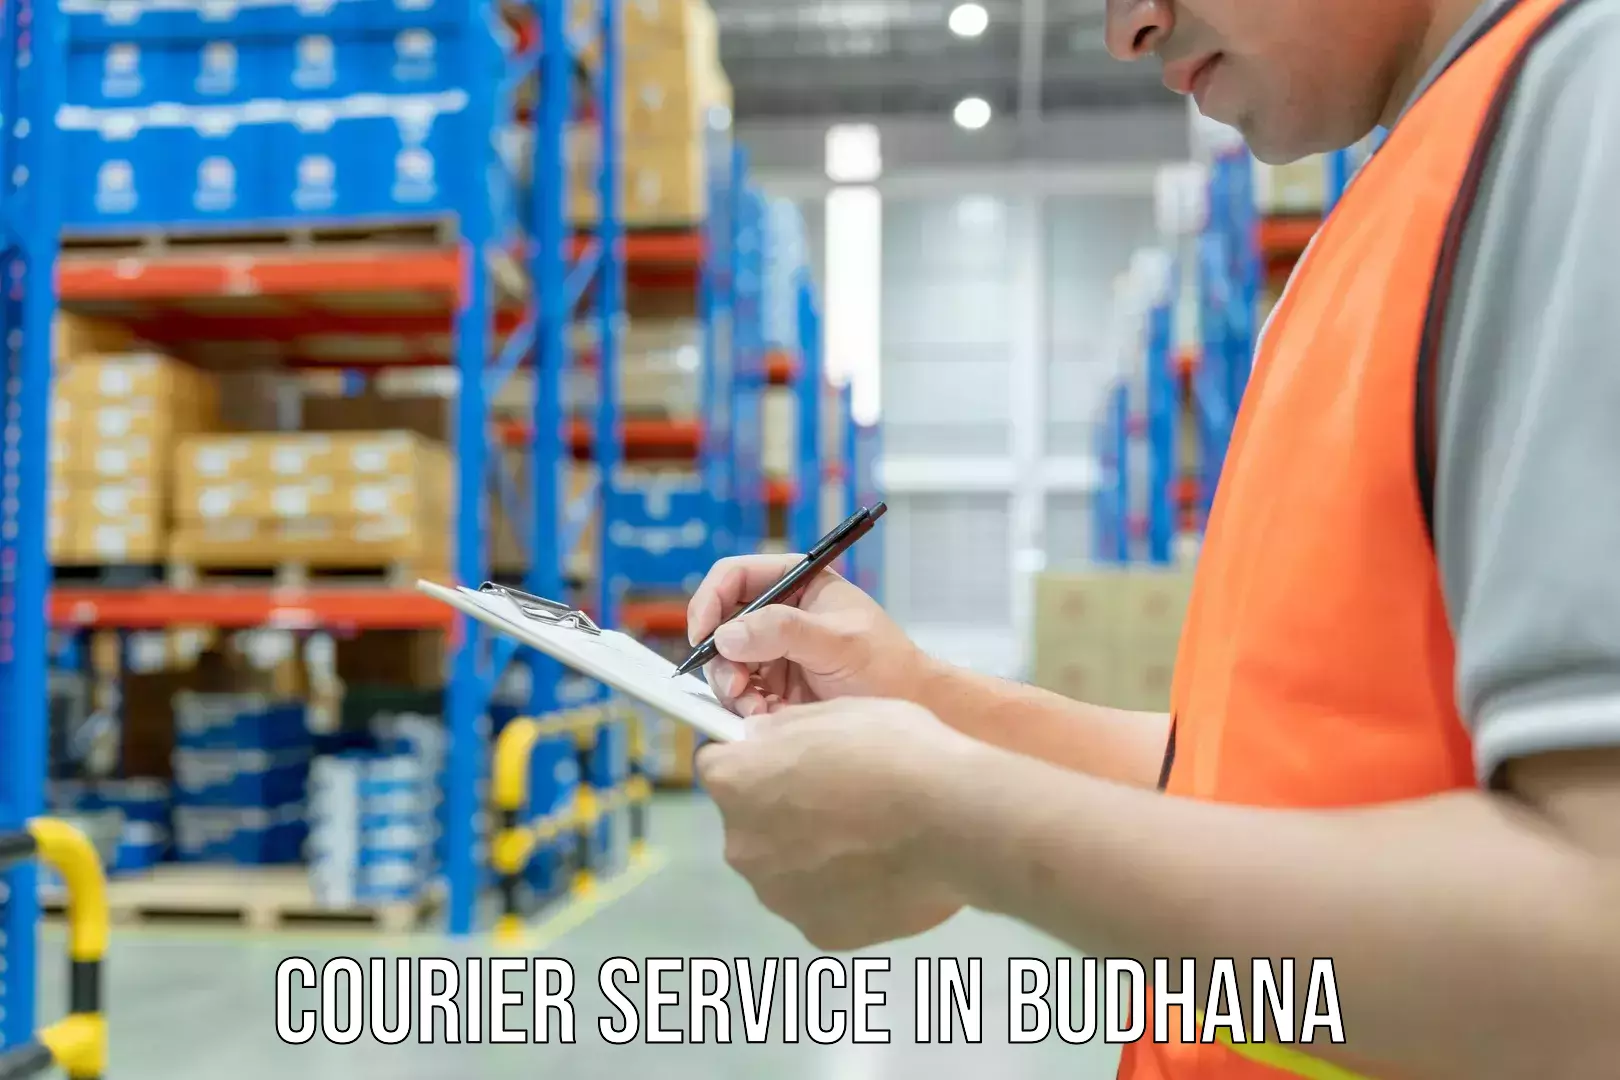 Emergency parcel delivery in Budhana